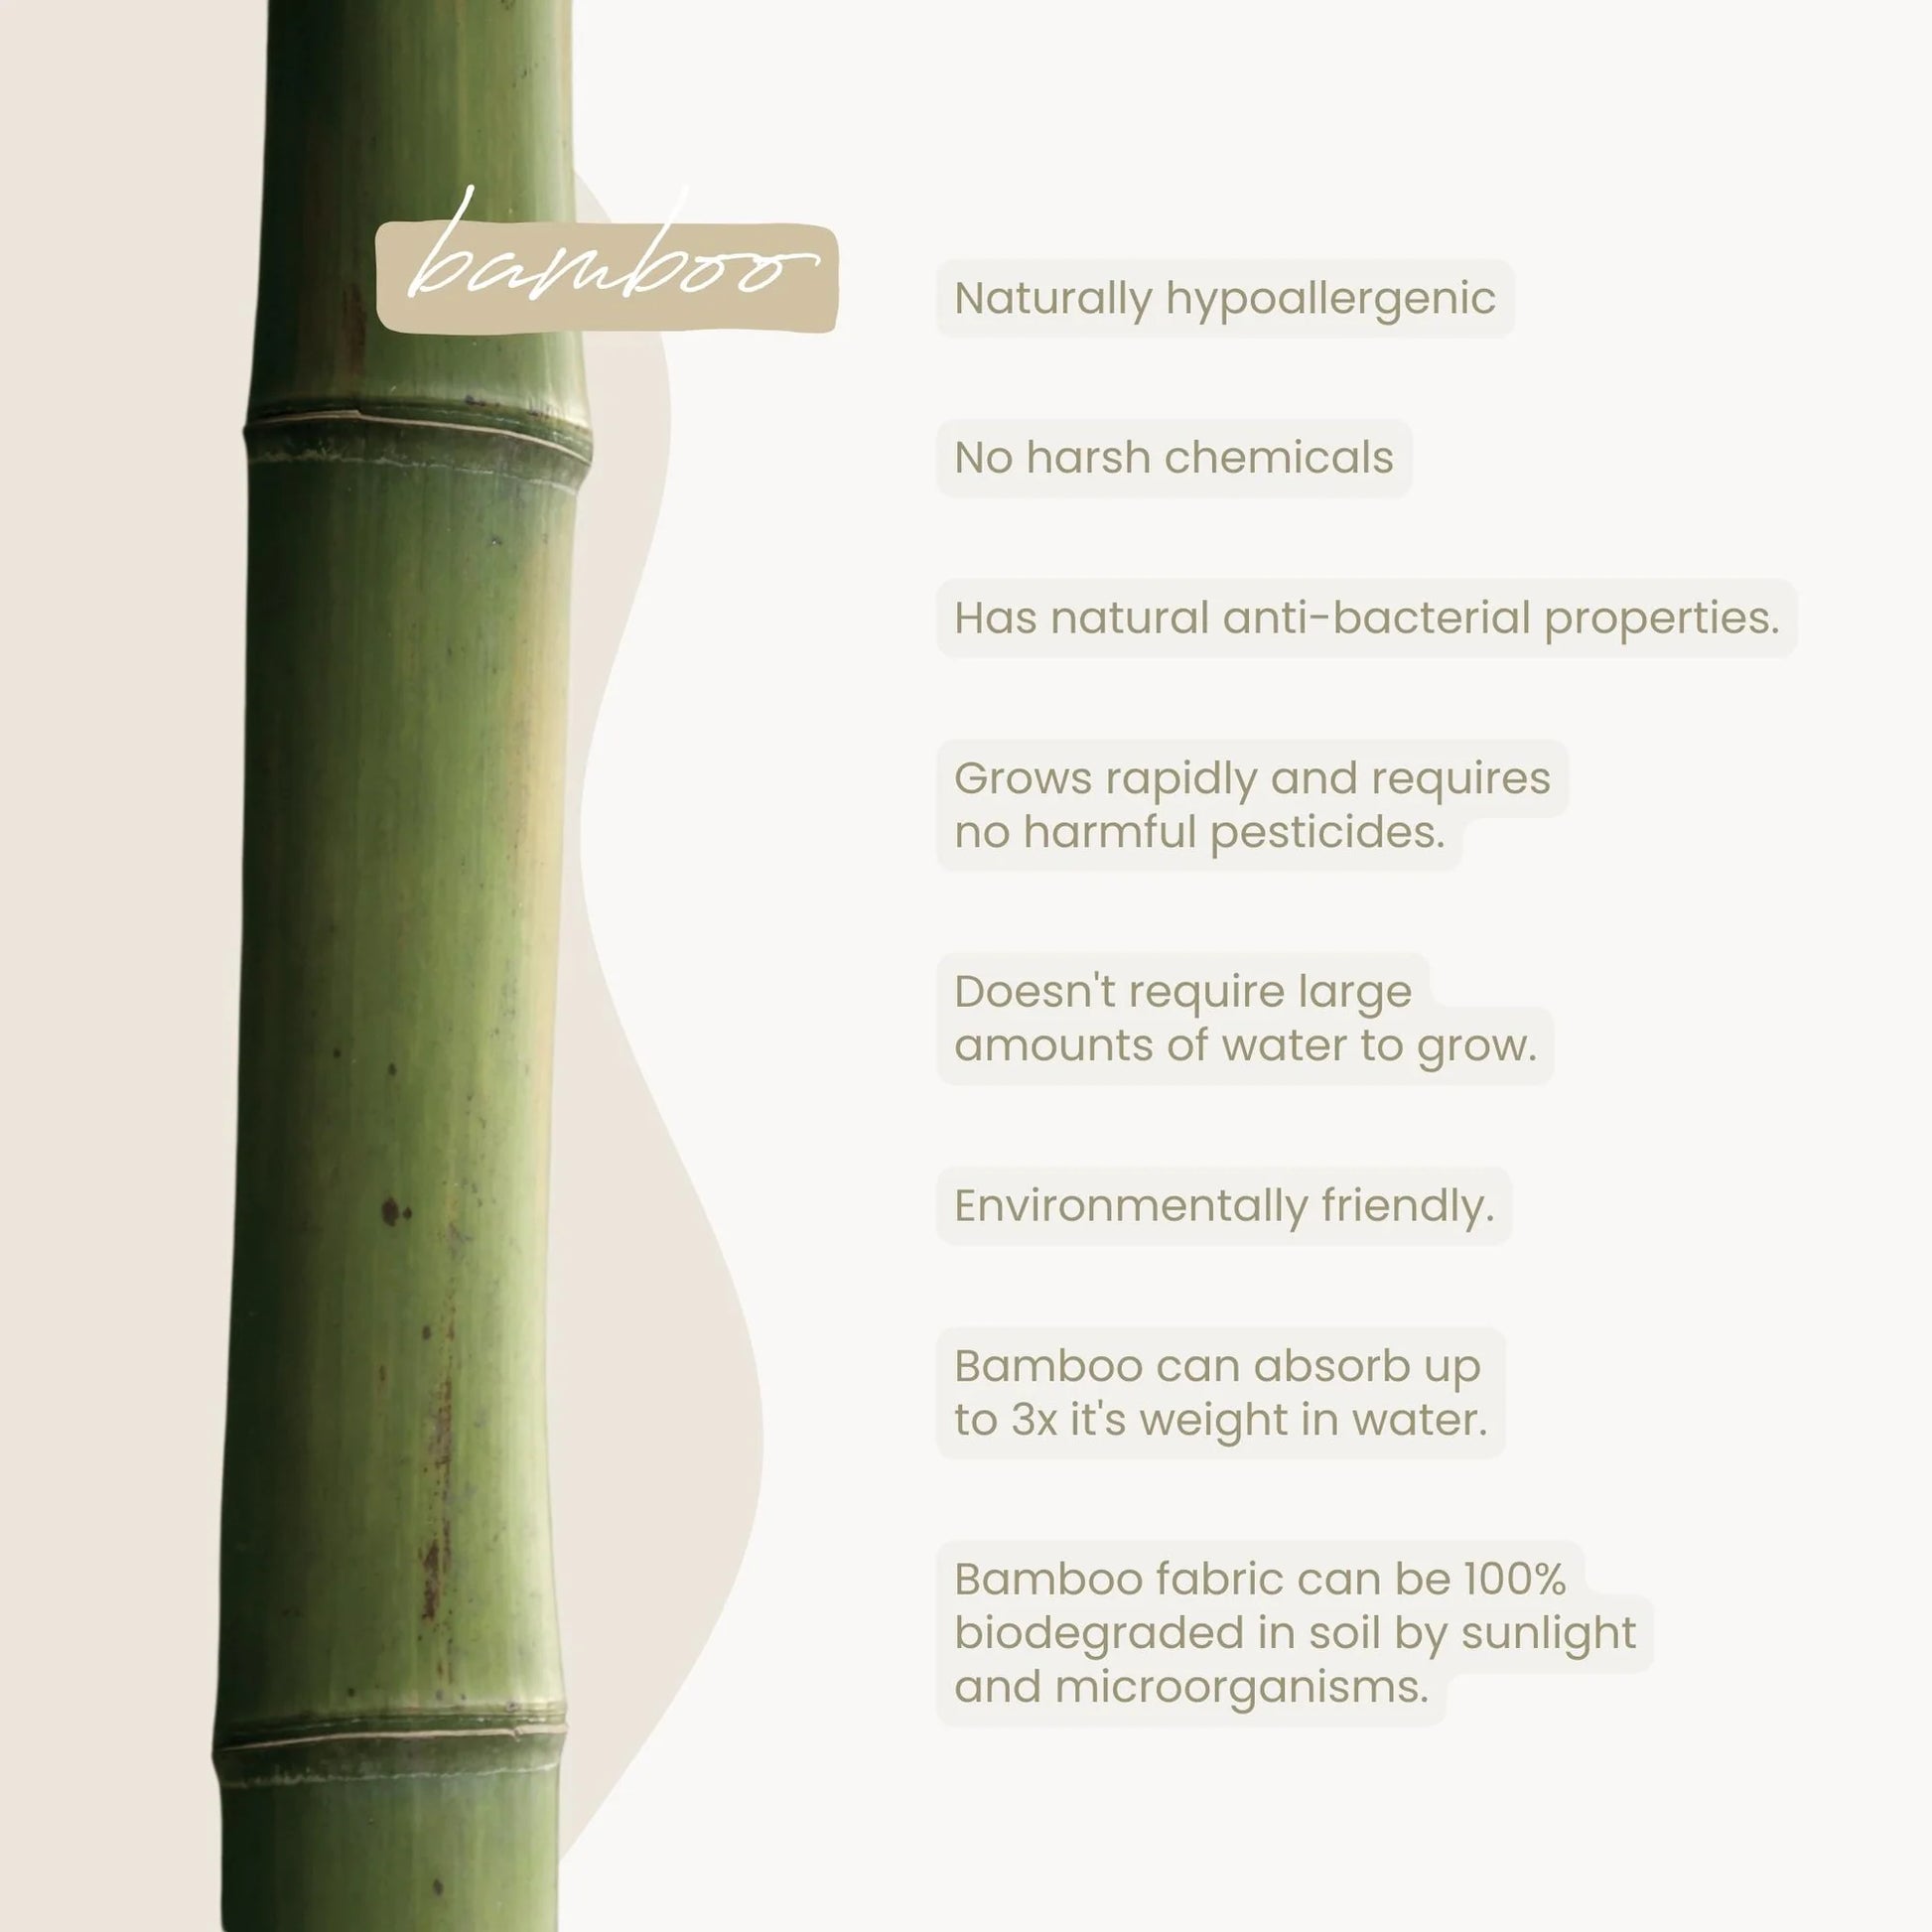 about bamboo, luv me